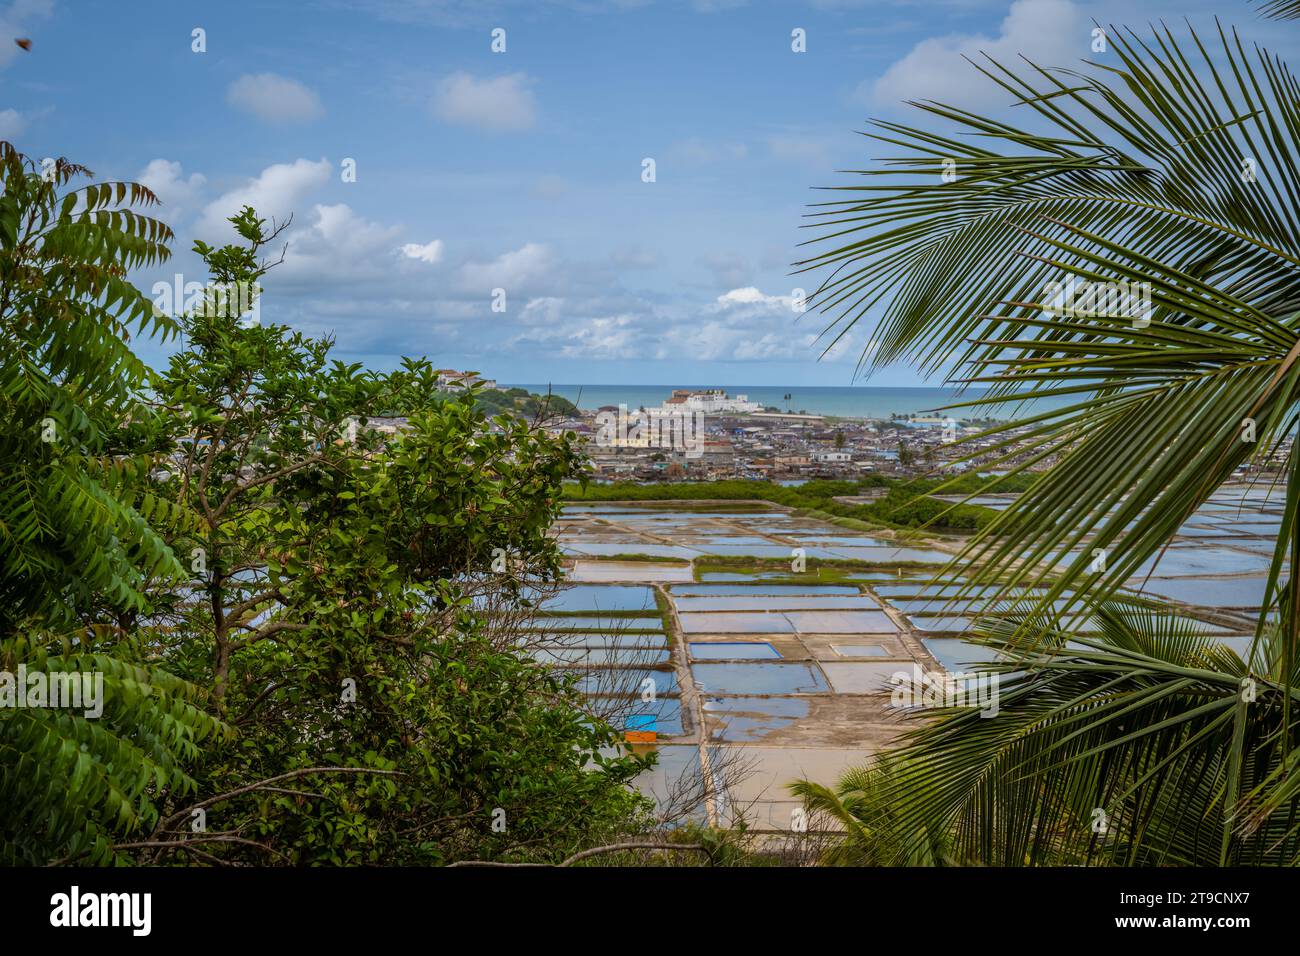 View on Elmina Castle in Ghana with trees and ocean Stock Photo